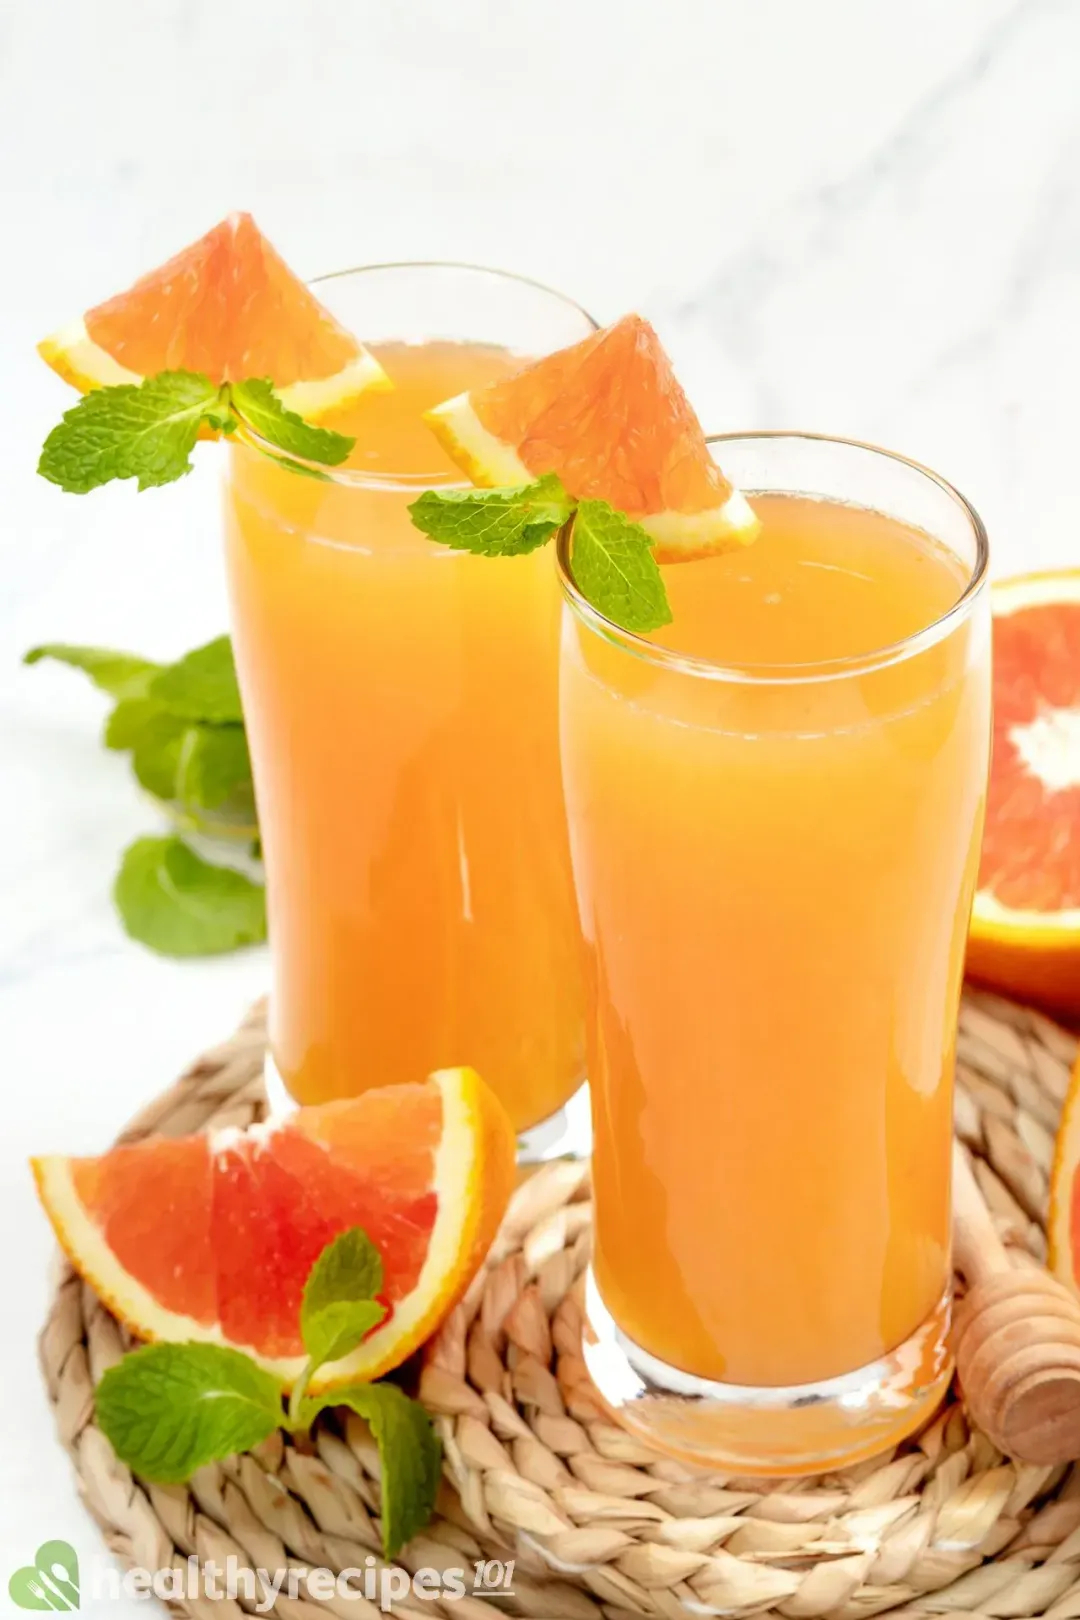 Two glasses of grapefruit juice garnished with mints, grapefruit wedges, and next to a wedge of grapefruit